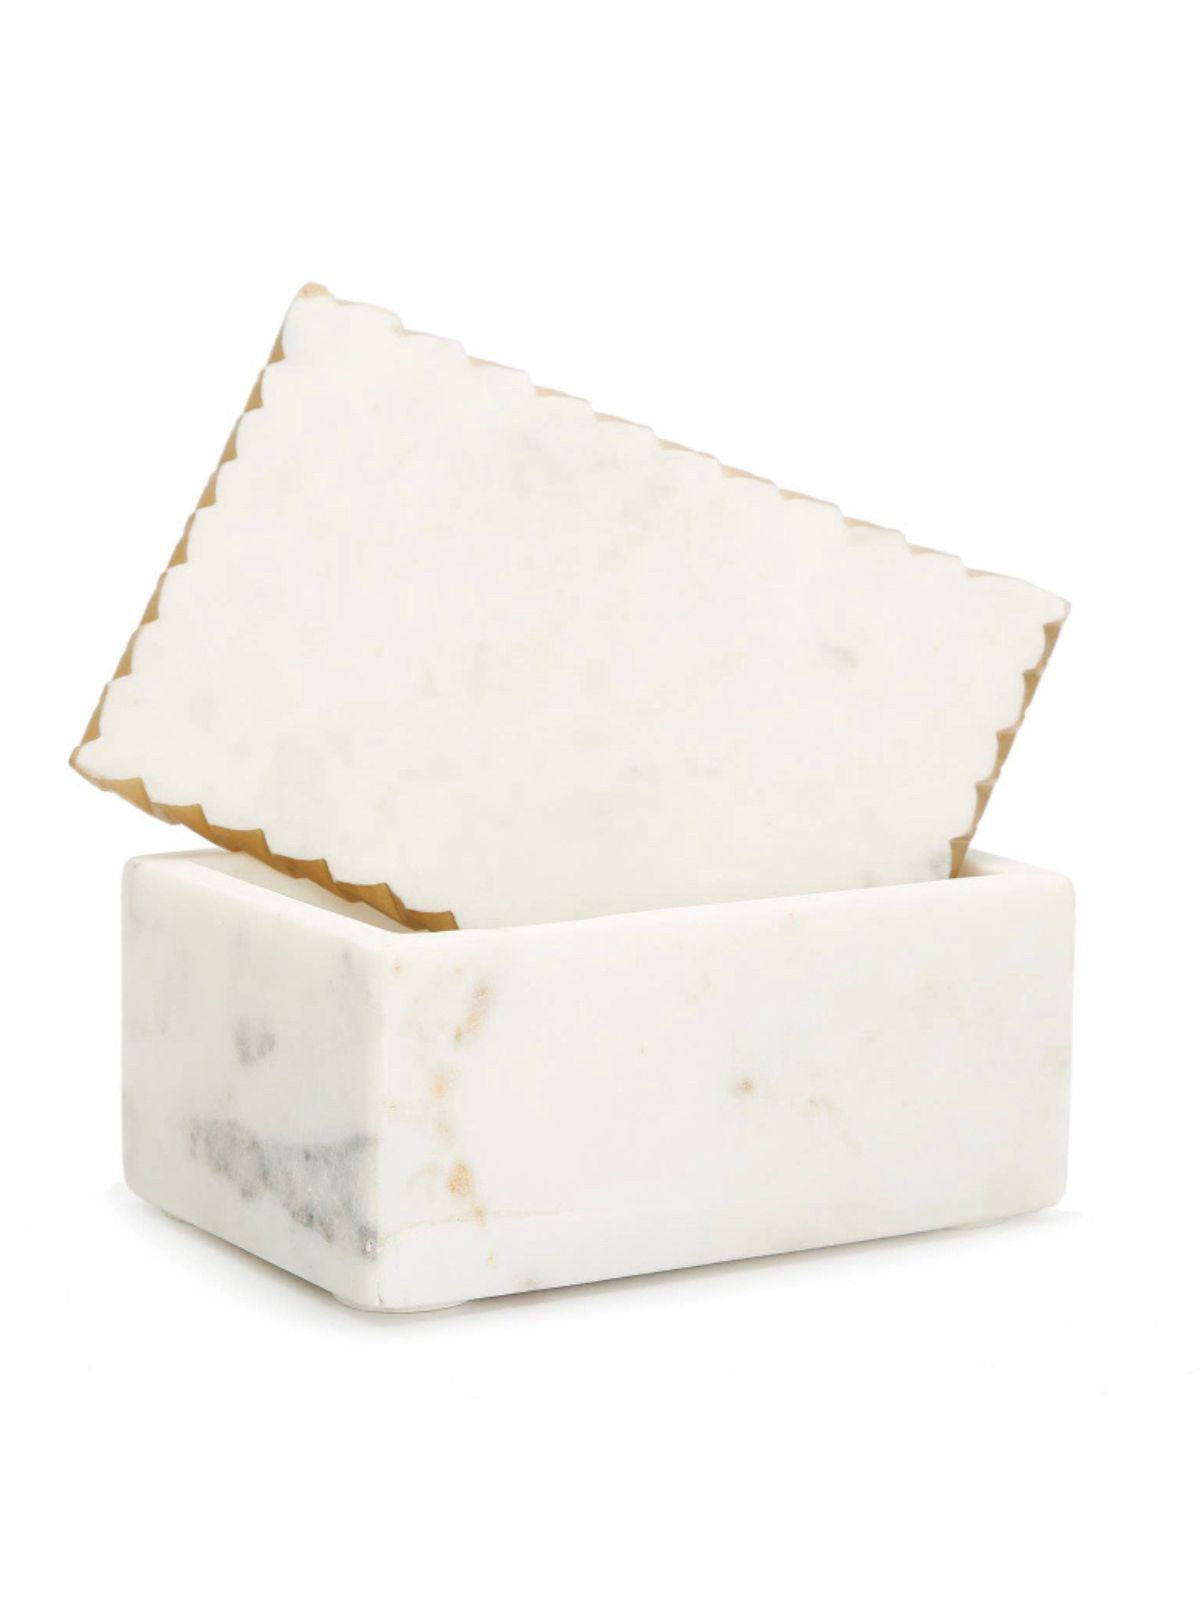 White Marble Decorative Box With Gold Edge Measures 6.5L x 4.5W x 3H. Sold by KYA Home Decor